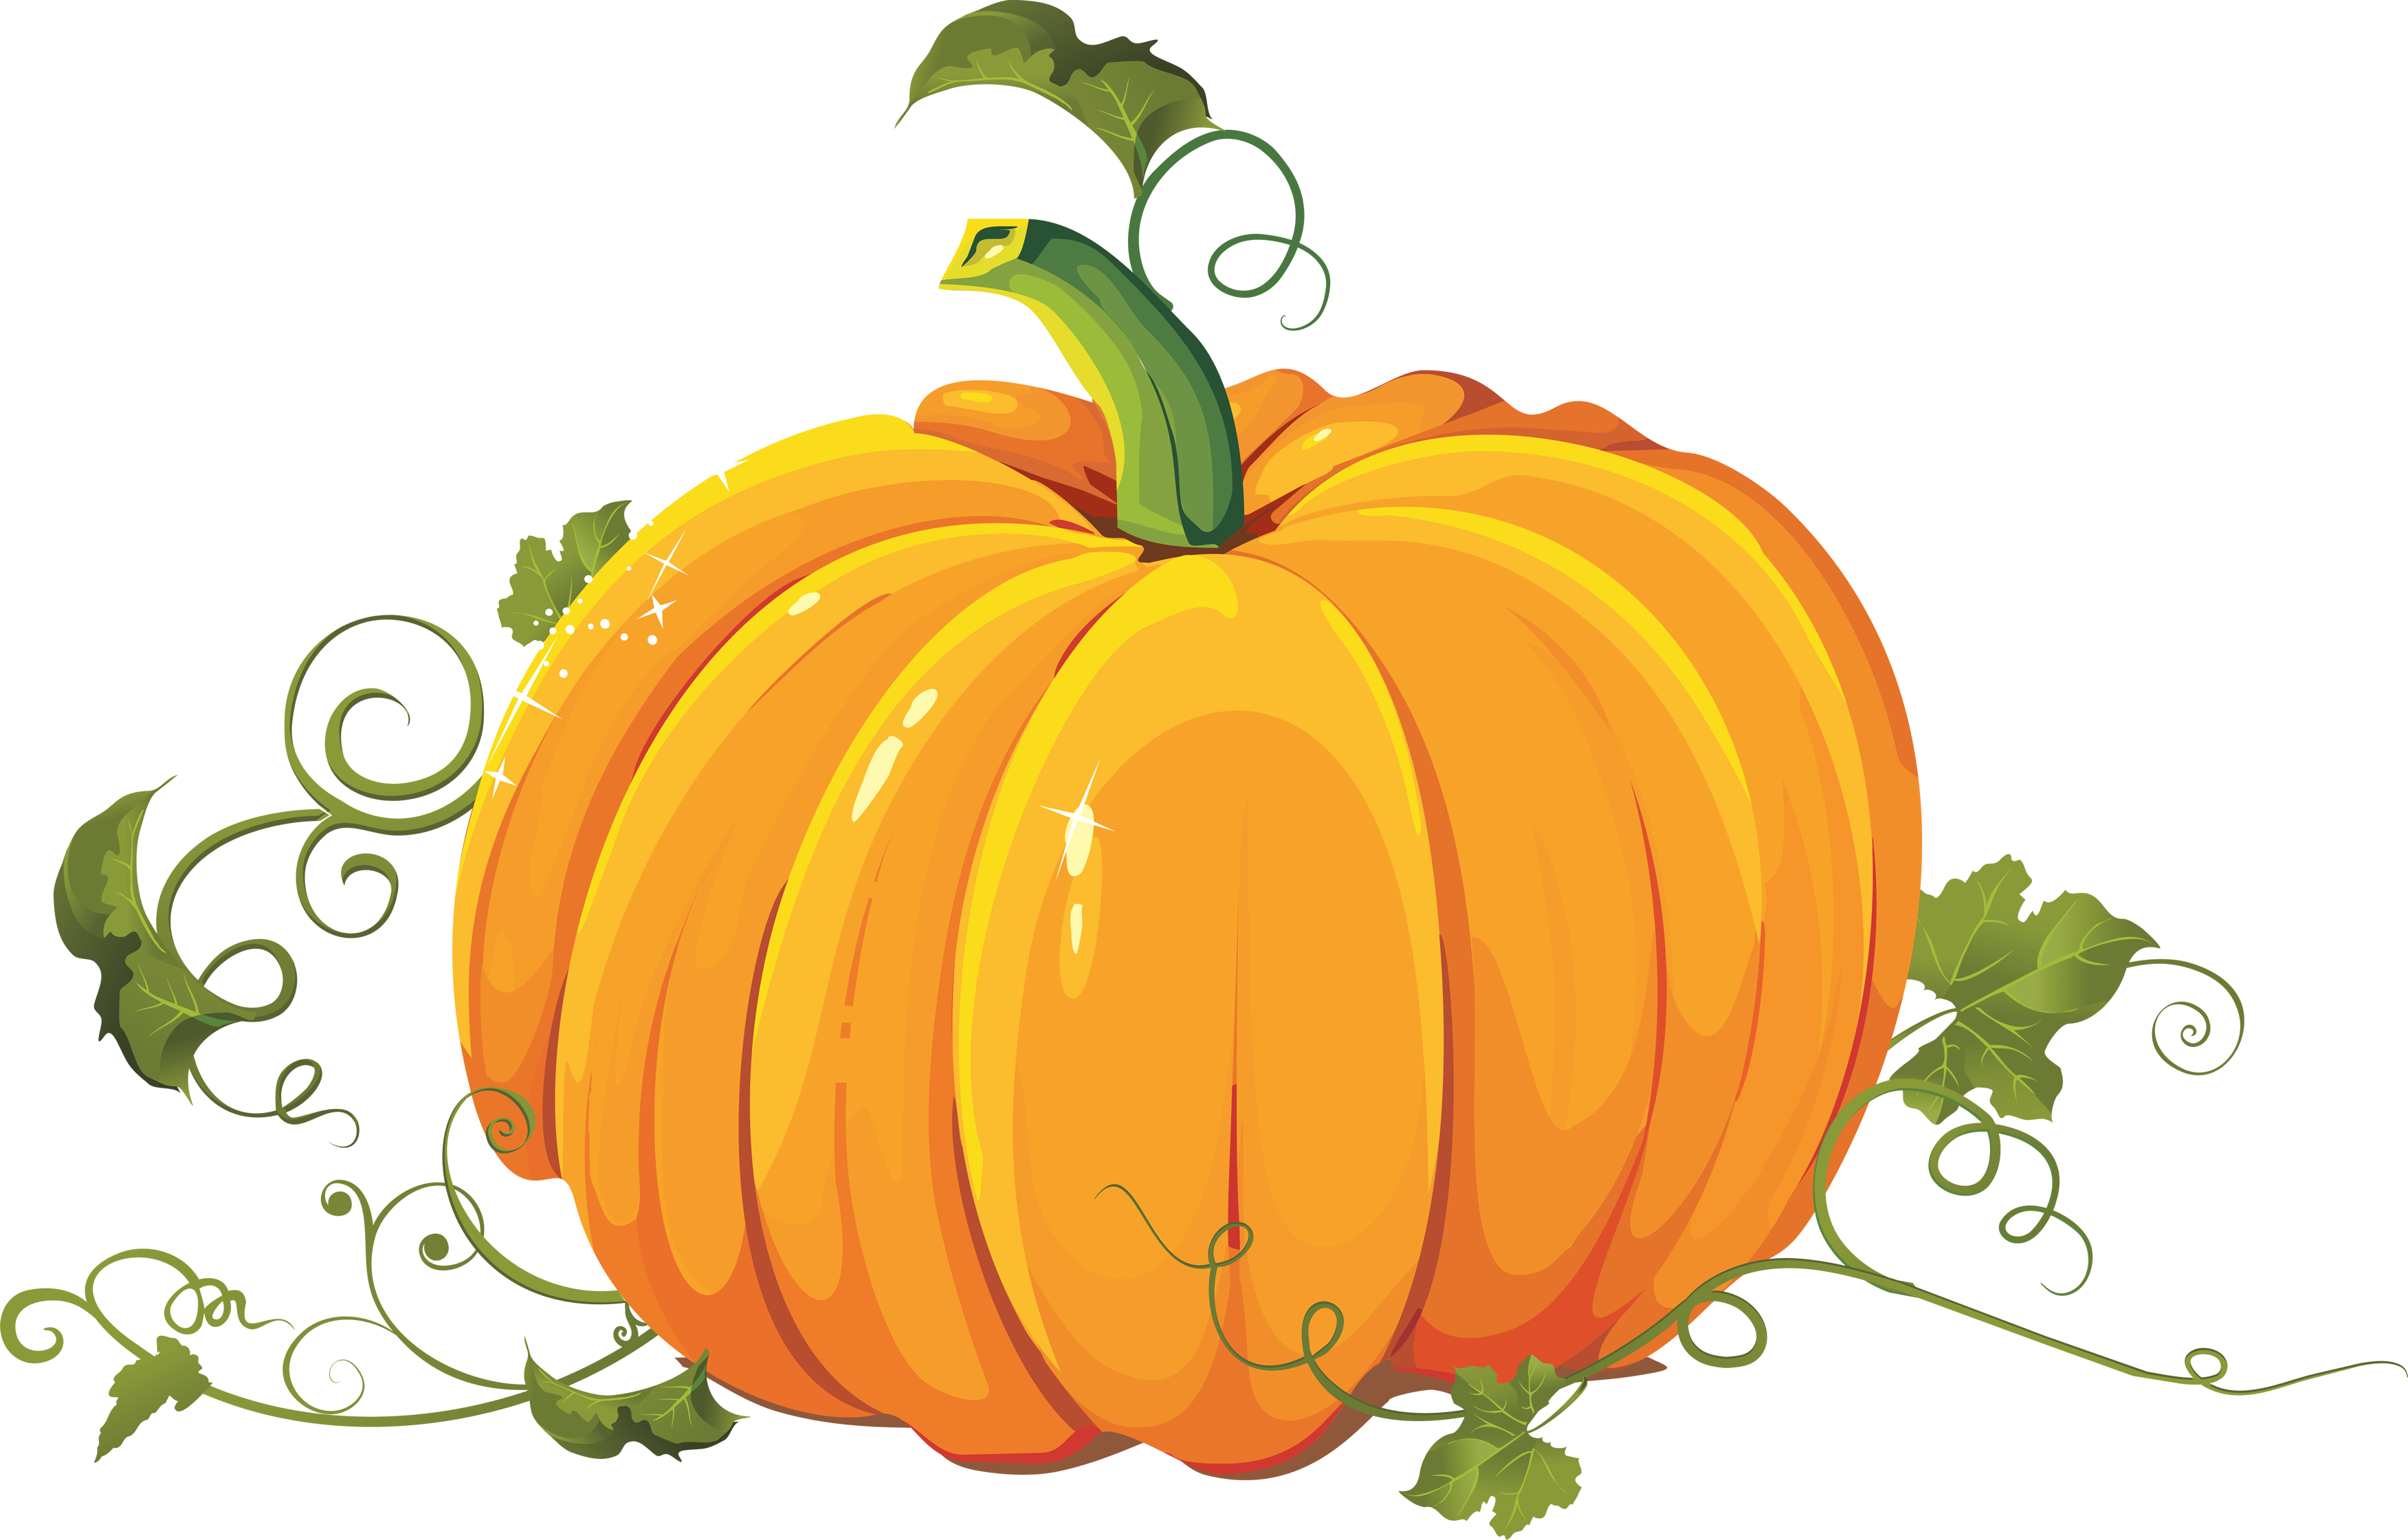 Fair Pumpkin Picture Clipart Printable For Humorous Free Pumpkin Clipart  Images Clipart Panda Free Clipart Images Page Pict | Holyfamilyandheri clipartlook.com  : Free ClipartLook.com 